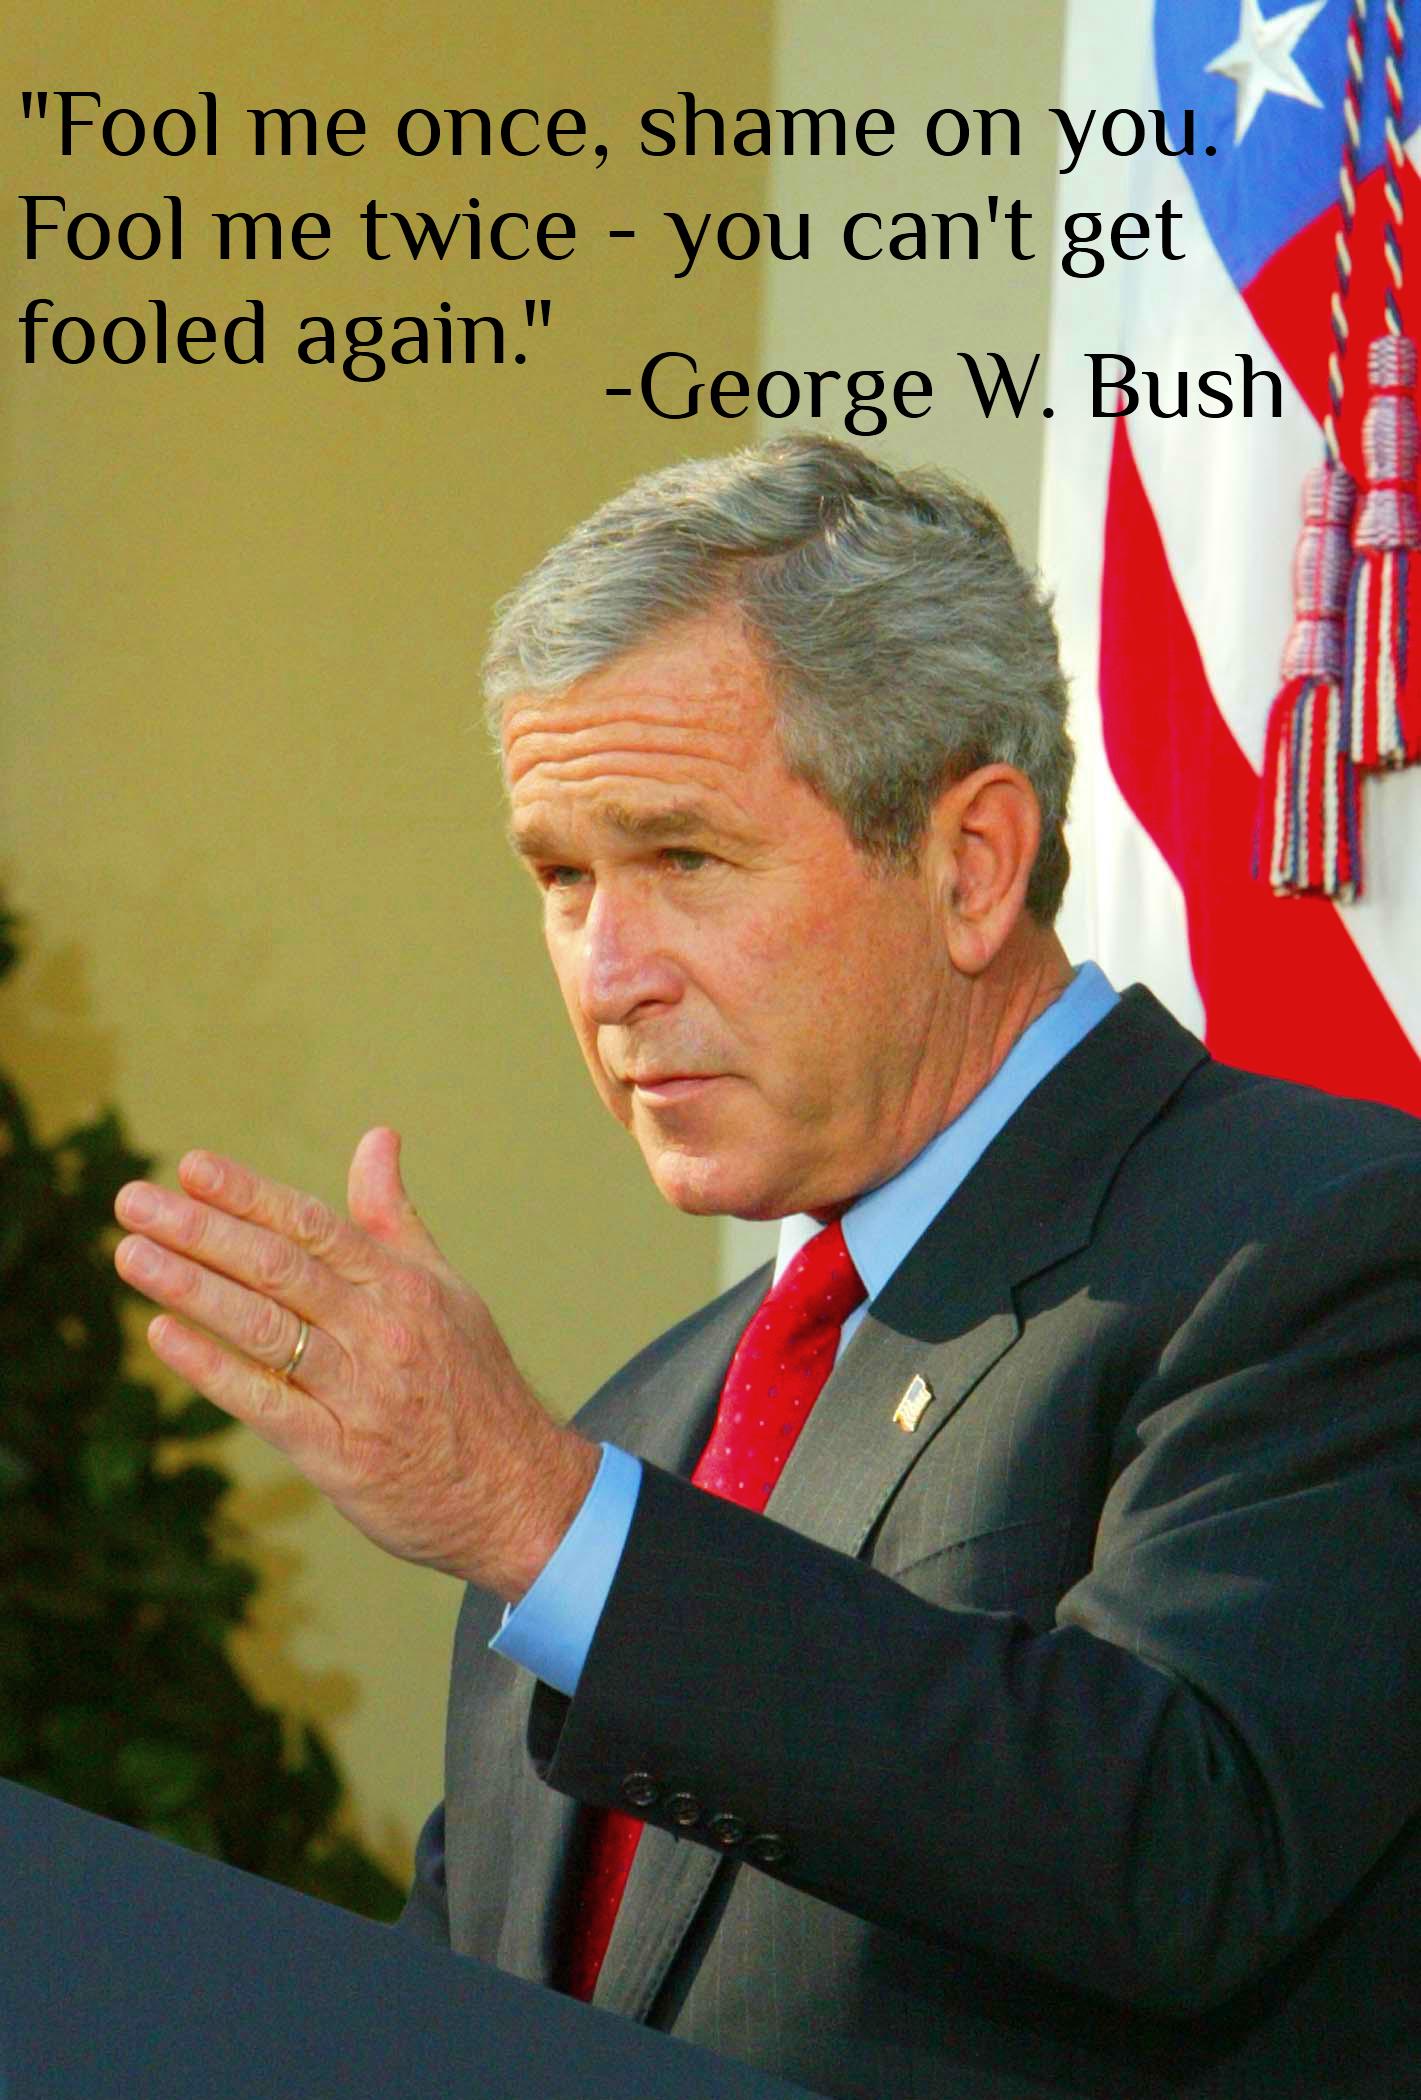 George Bush Fool Me Once Quotes.